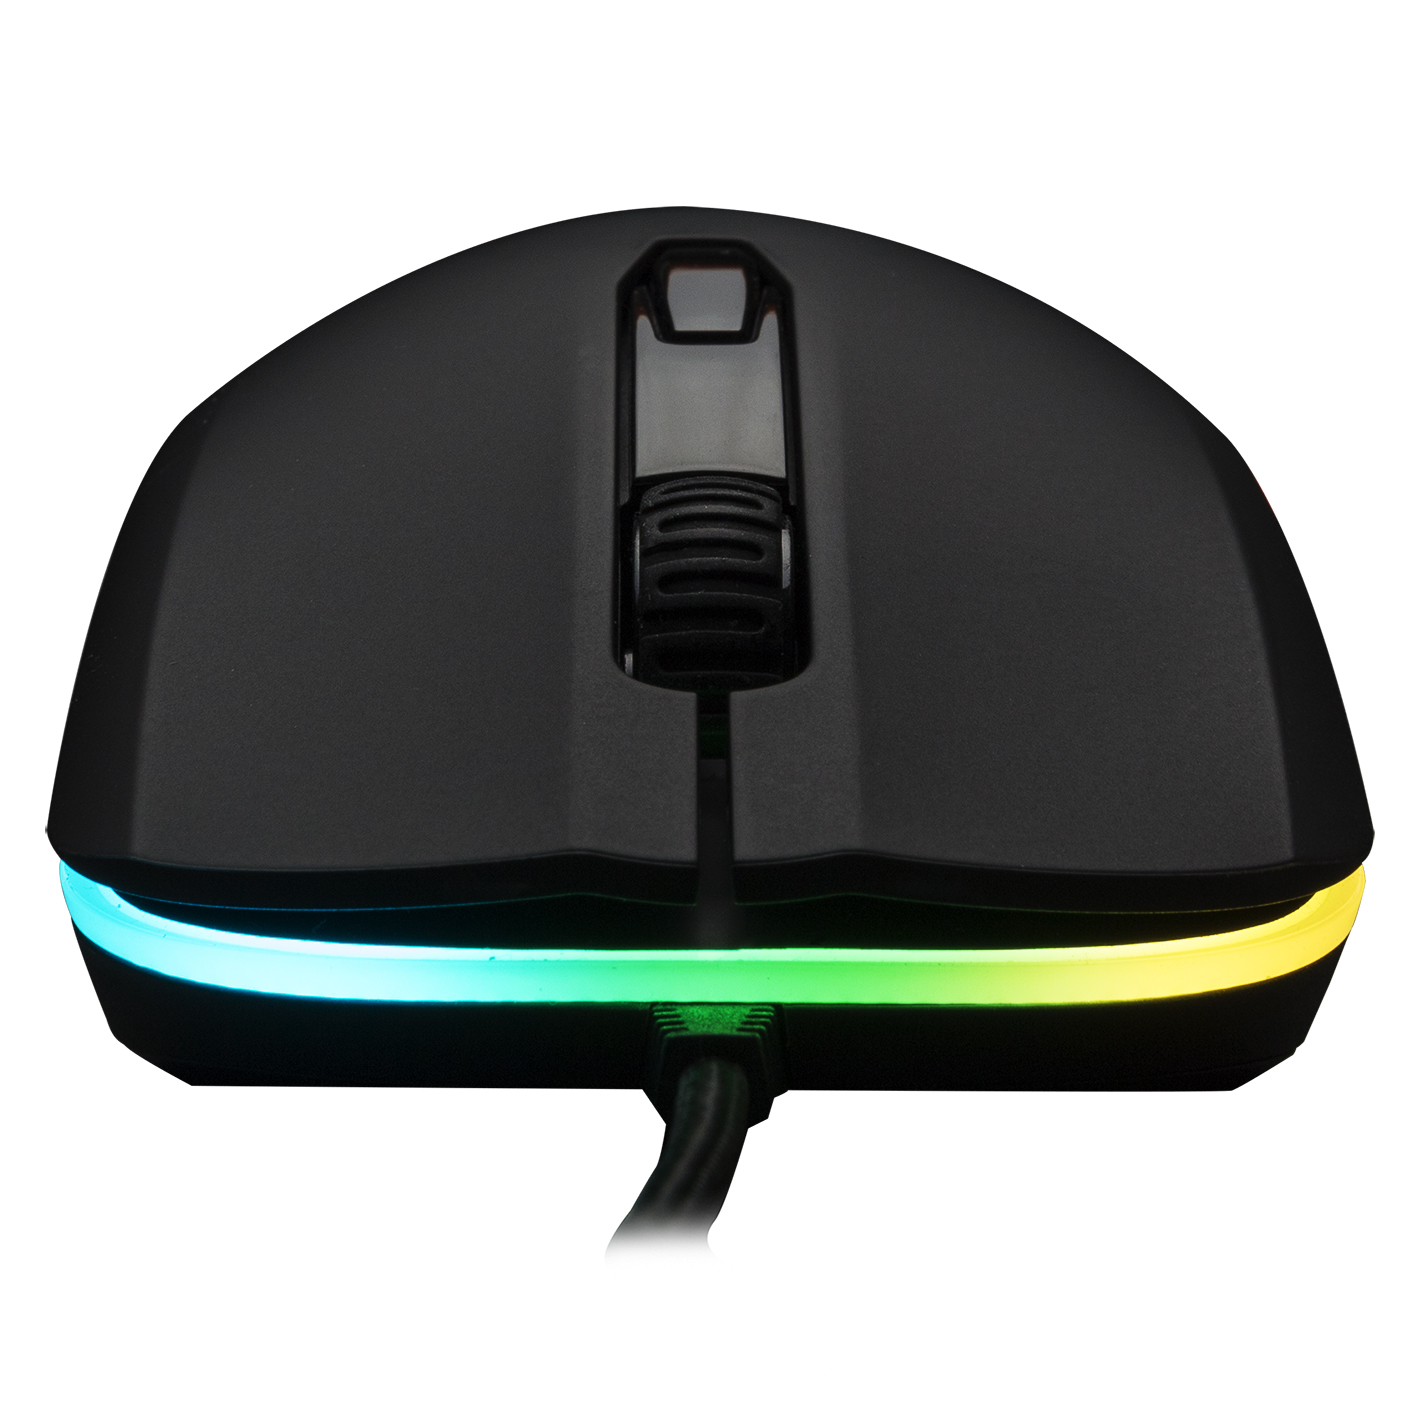 HyperX Pulsefire Surge Gaming Mouse RGB - image 3 of 7